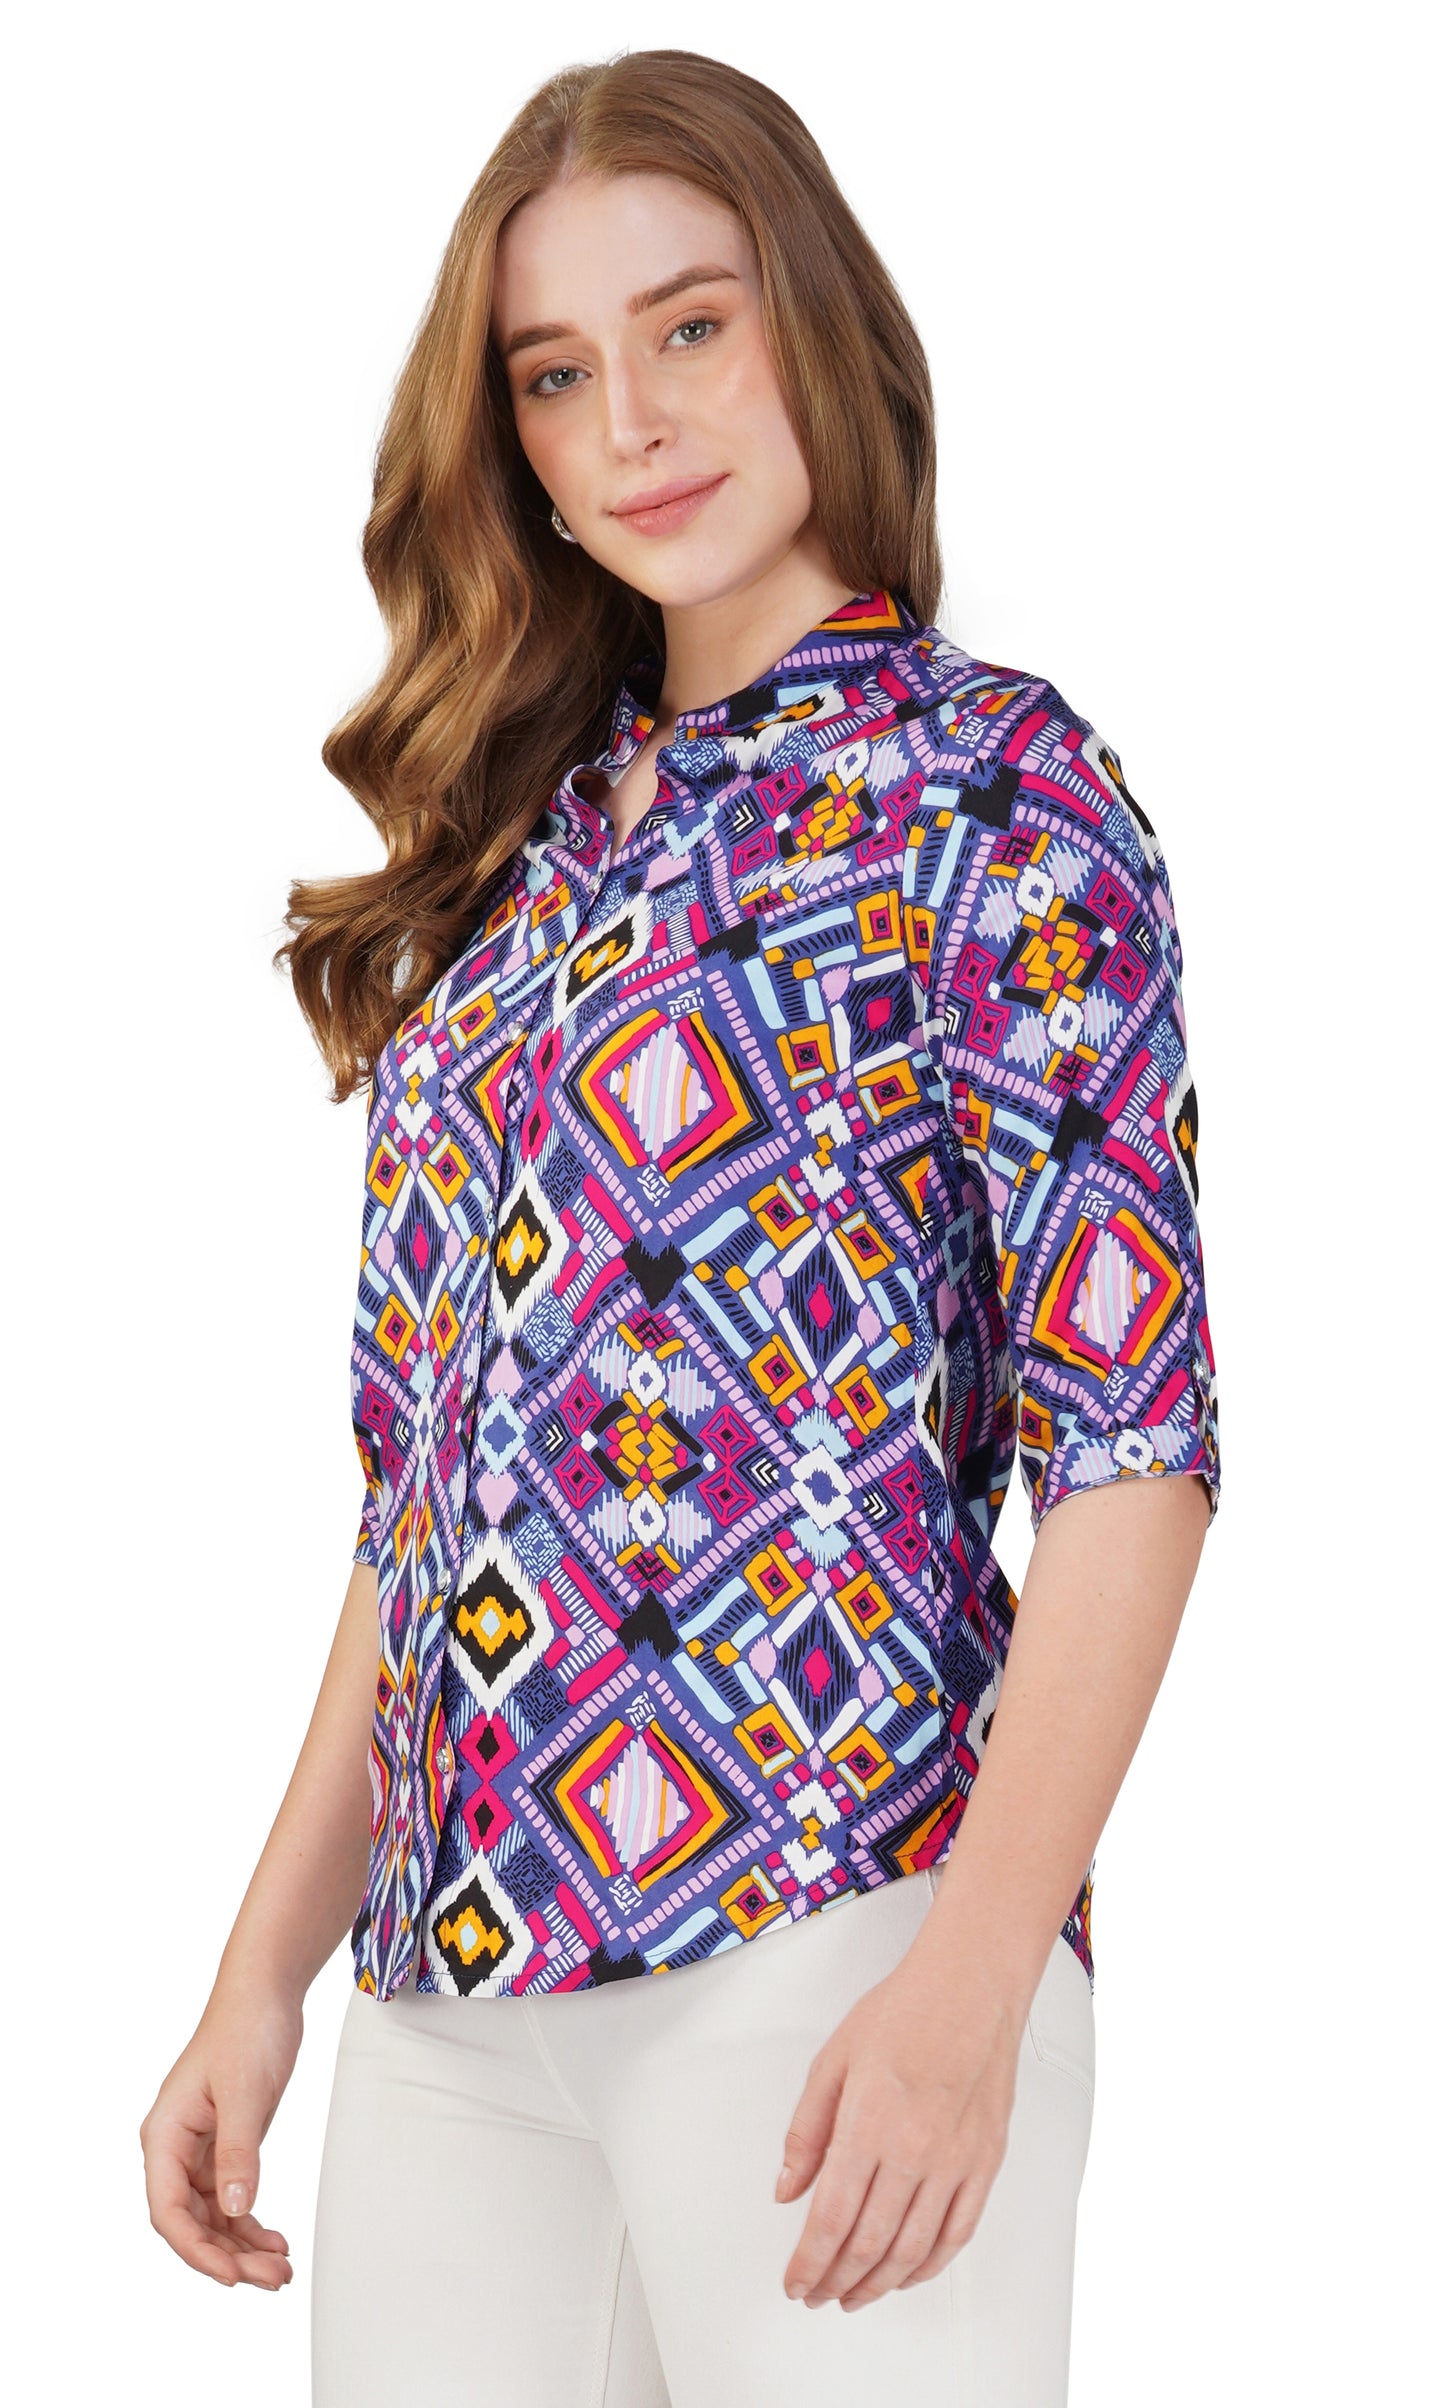 Vastraa Fusion Women's CottonFestival and Regular Wear Printed Tops